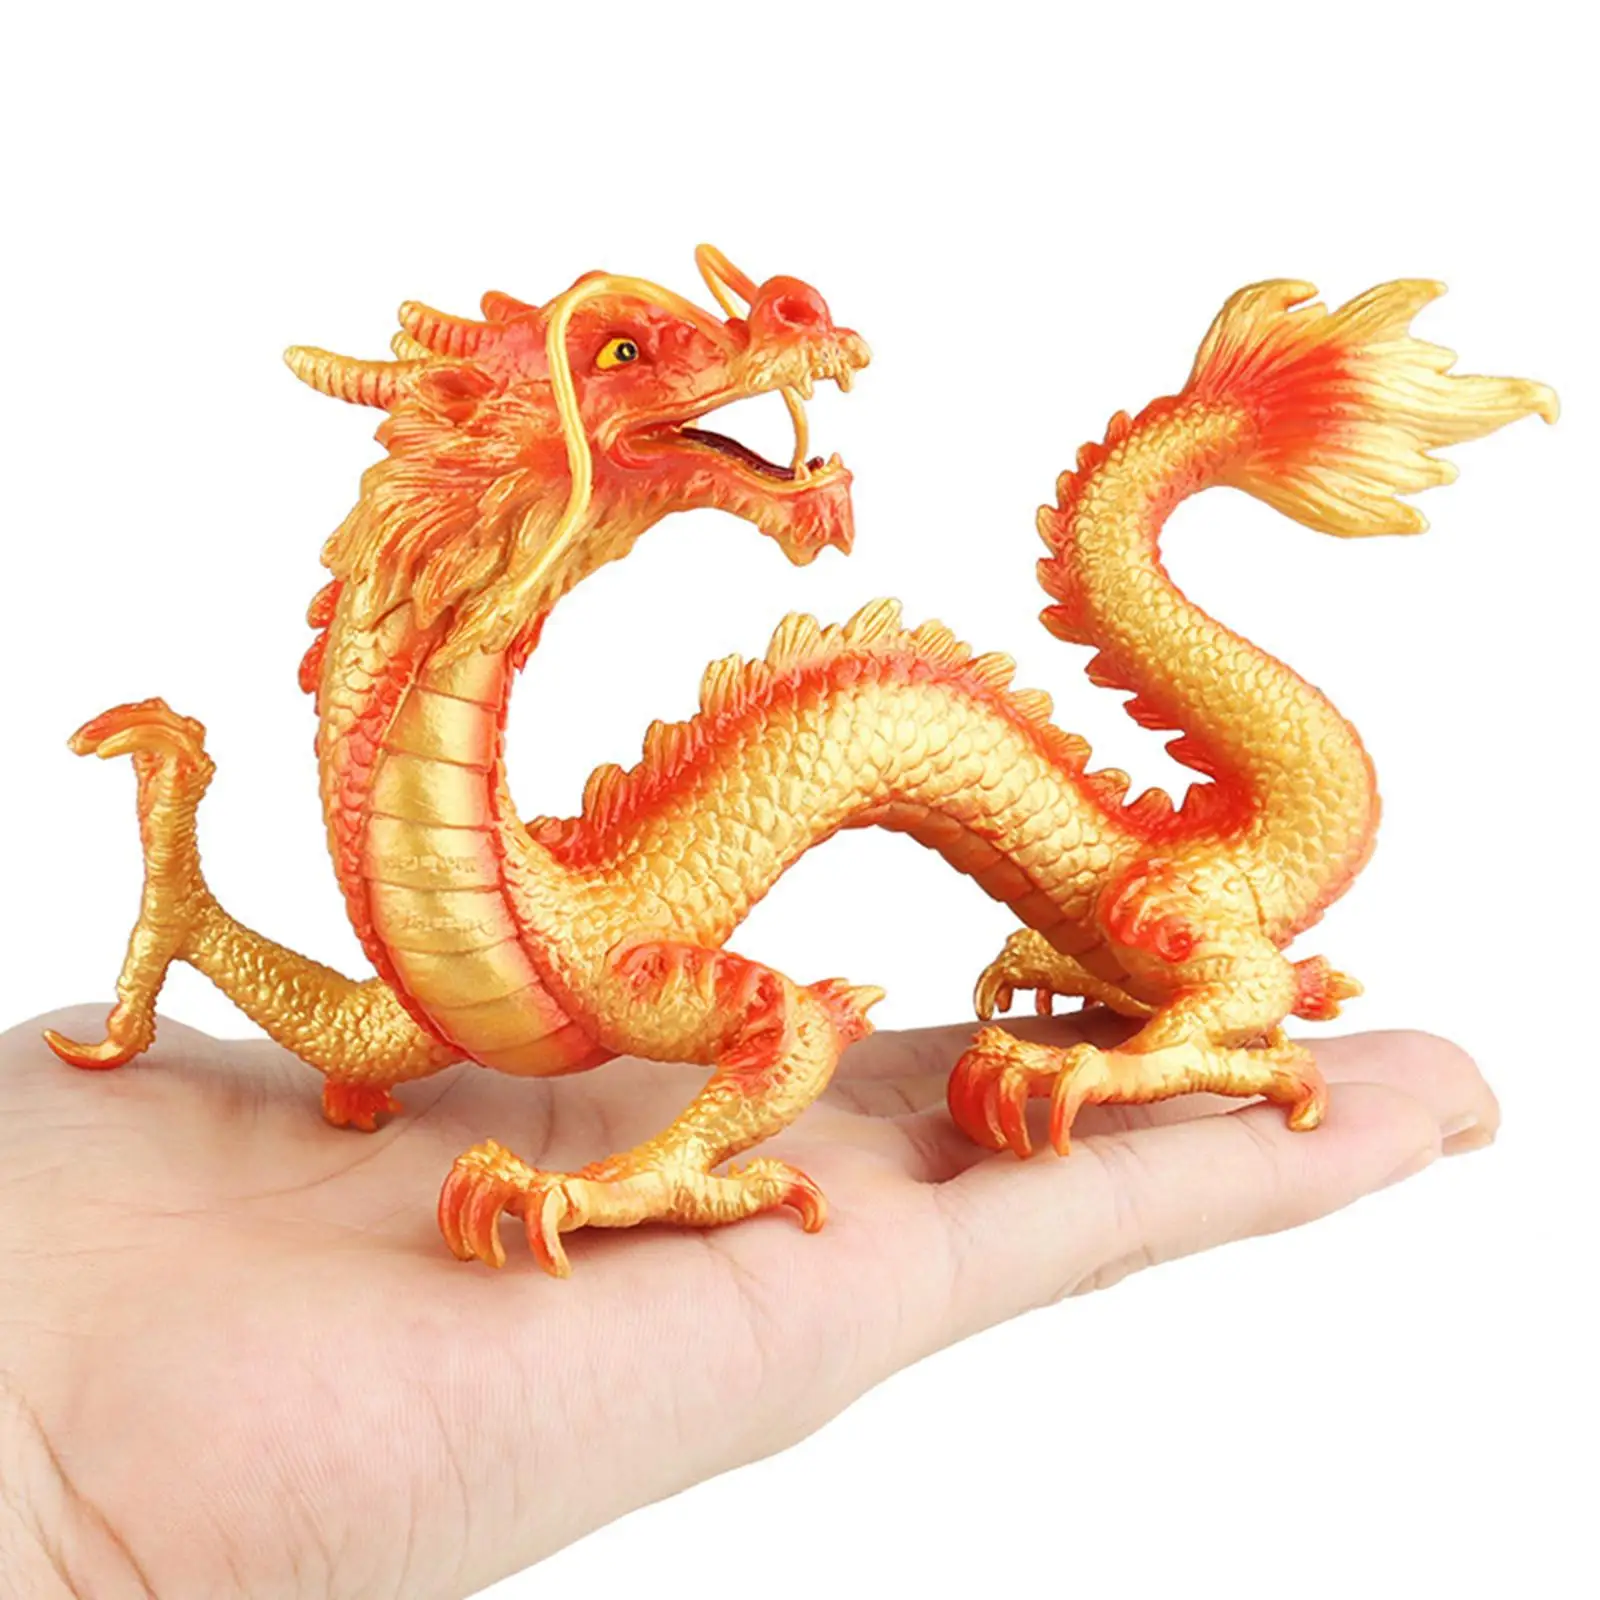 Chinese Dragon Figurine Collection Educational Home Decor Realistic Detailed Action Figures for Age 3+ Girls Boys Gift